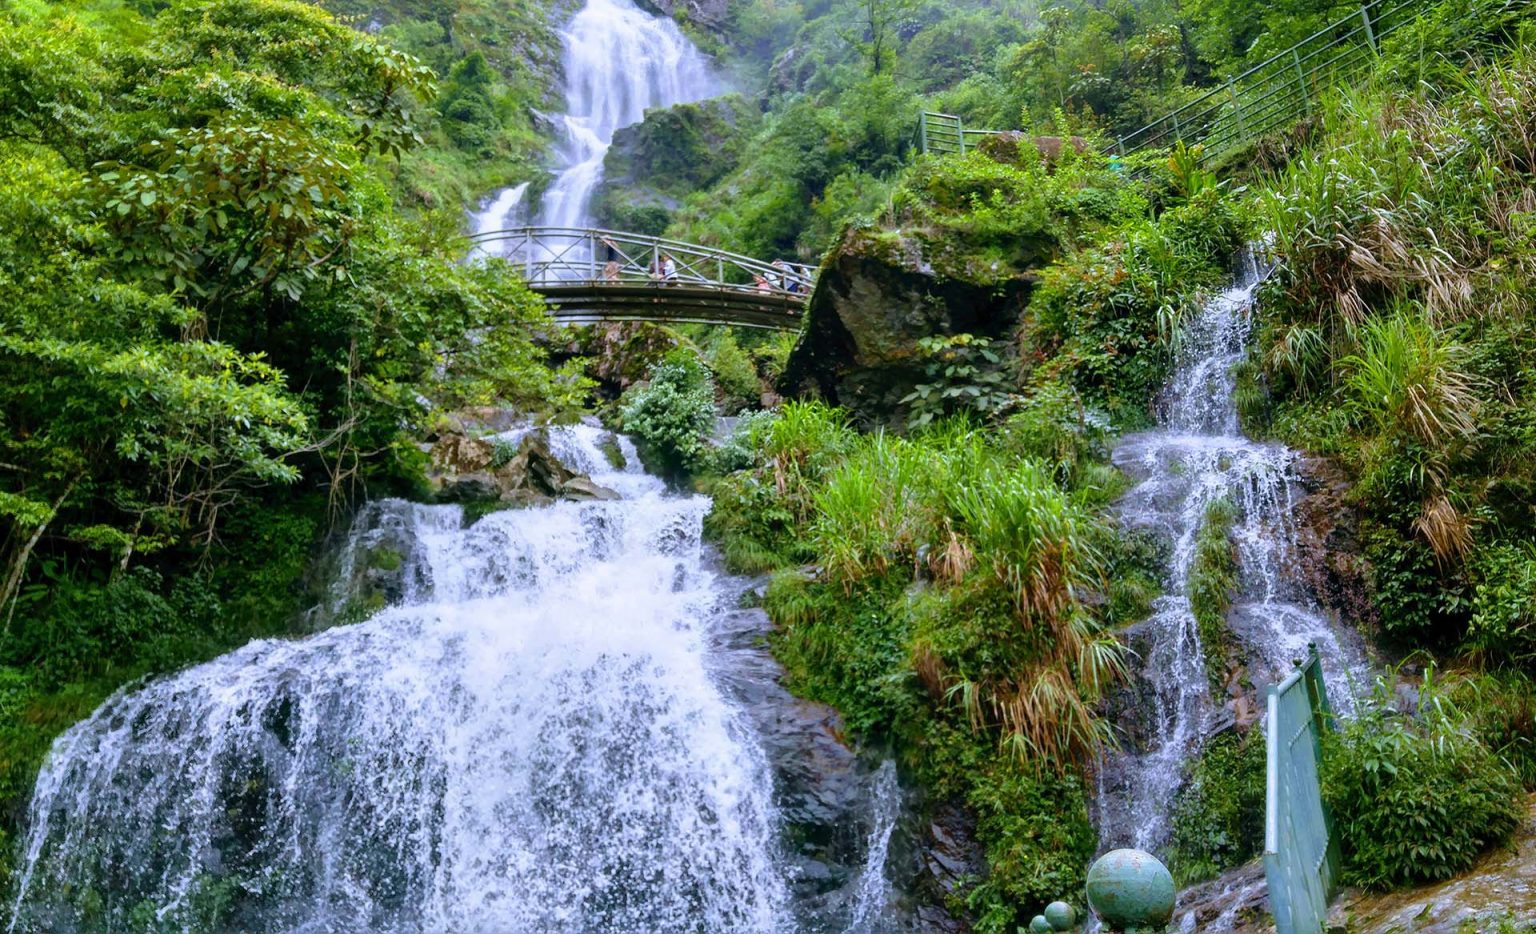 Sometimes you have to get lost to find yourself - Silver Waterfalls in Sapa